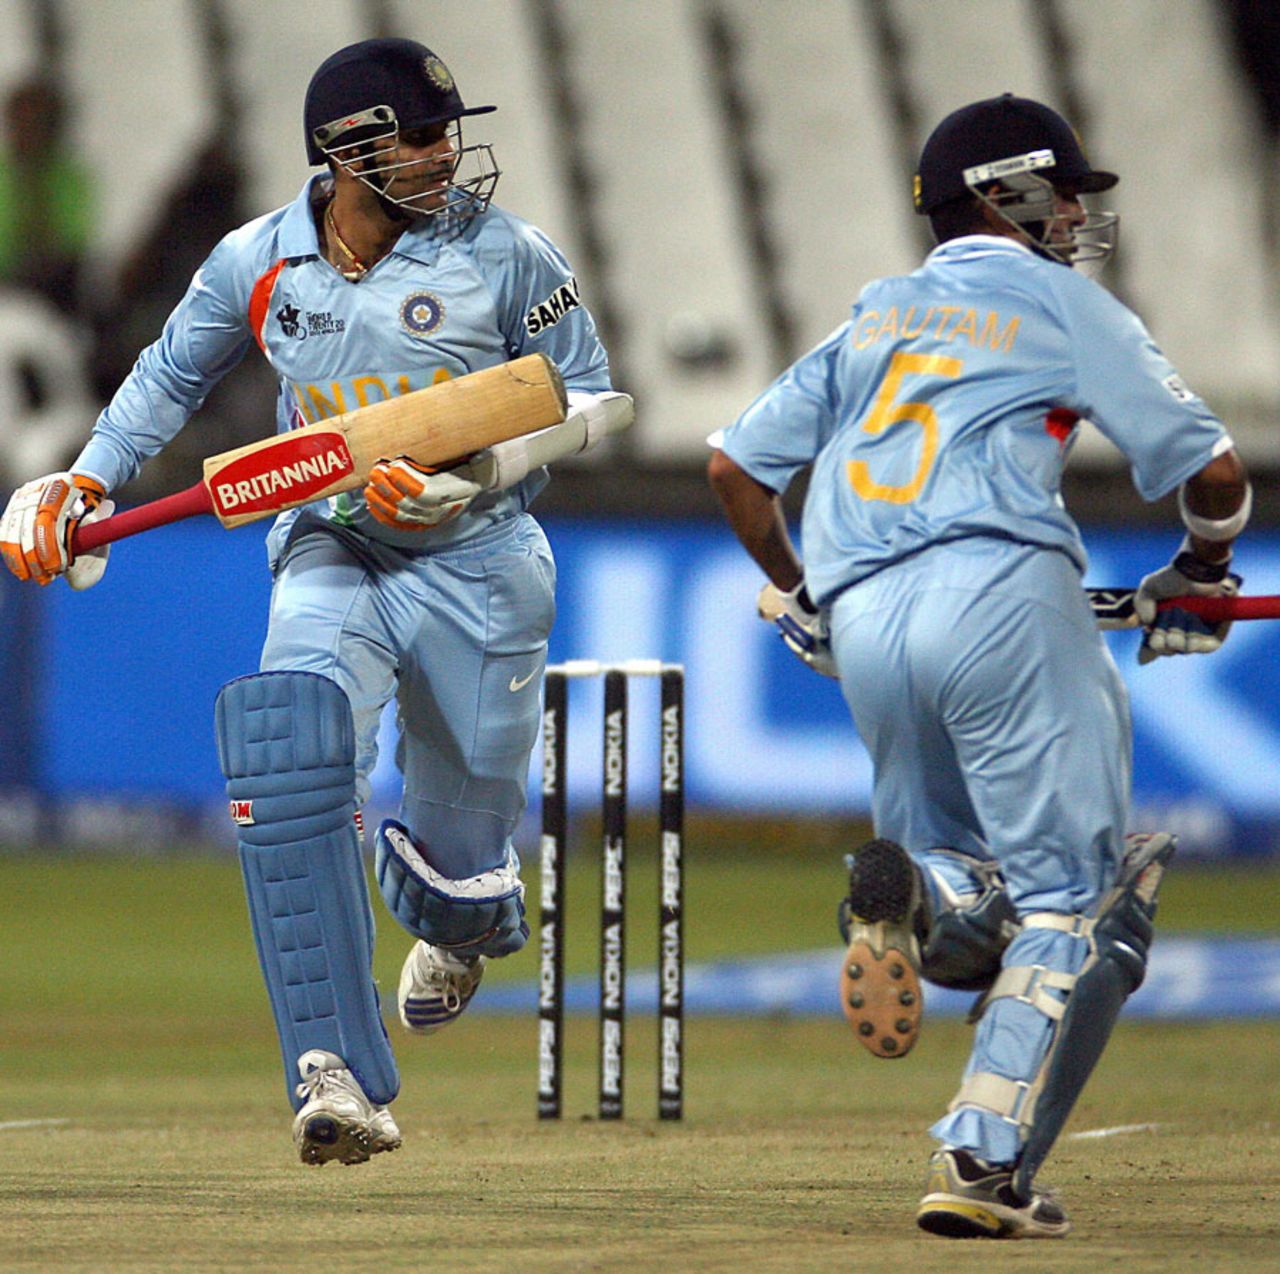 Virender Sehwag and Gautam Gambhir focus on the ball while running between the wickets, India v South Africa, Group E, ICC World Twenty20, Durban, September 20, 2007